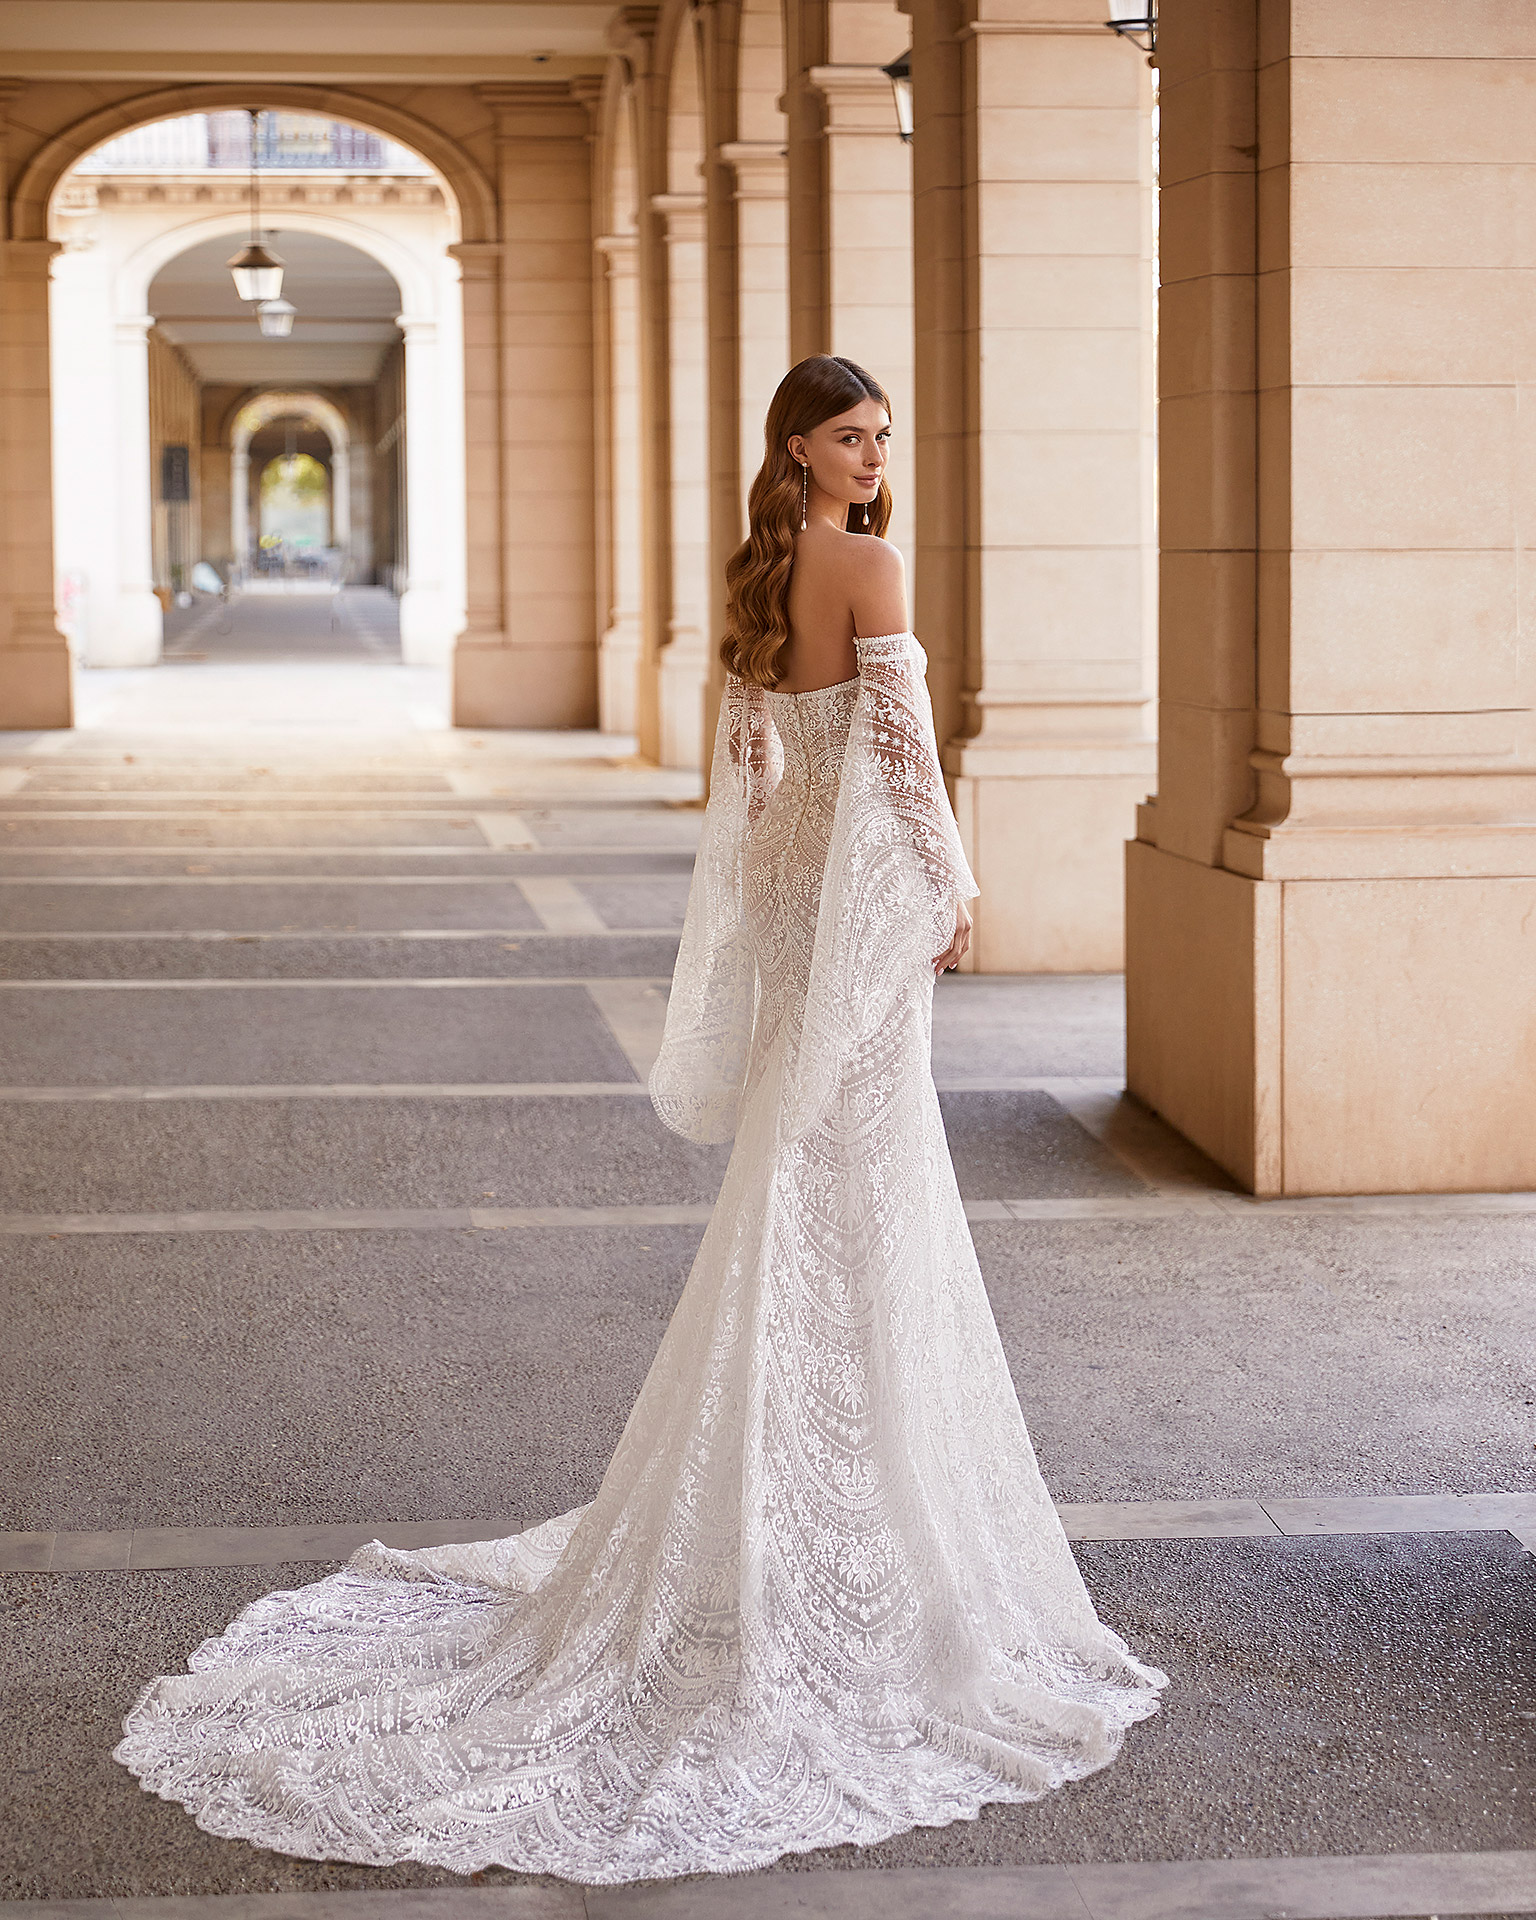 Romantic mermaid-style lace wedding dress, featuring flowing lace sleeves; with a push-up corset structure, a button-up back, and flowing sleeves. Exclusive Luna Novias outfit made of lace. LUNA_NOVIAS.